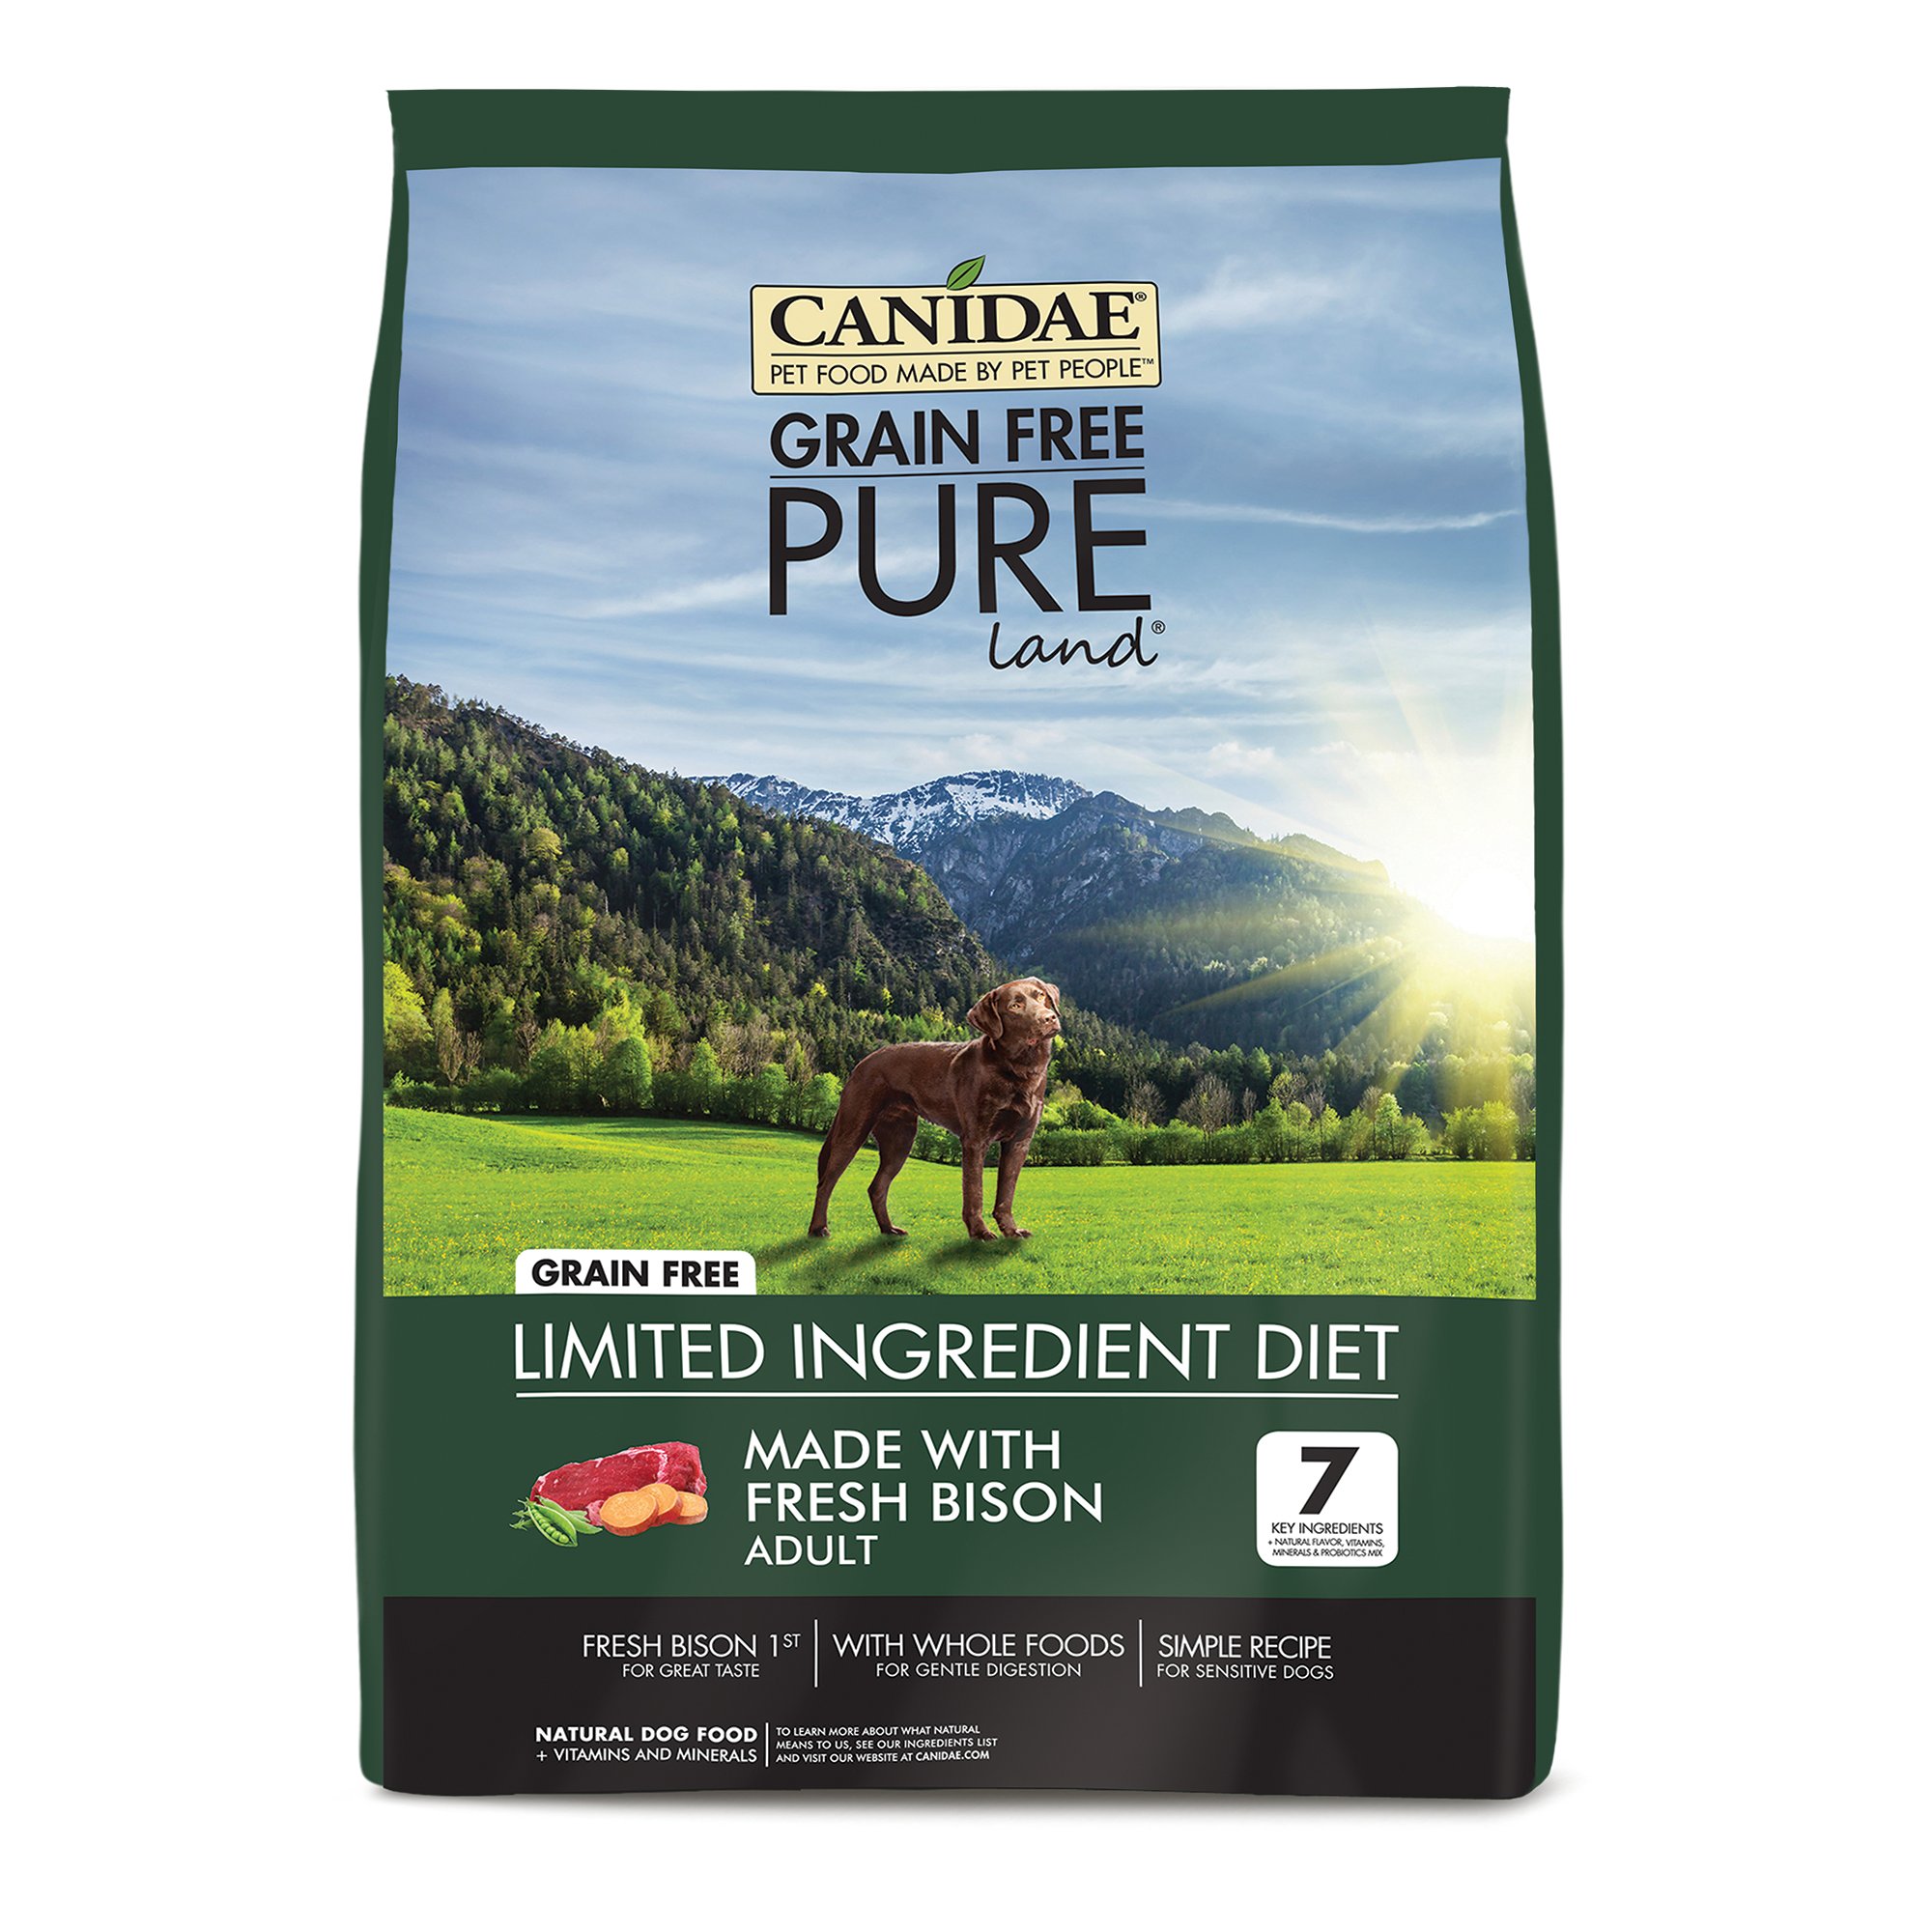 CANIDAE Grain Free PURE Land Adult Fresh Bison Dry Dog Food